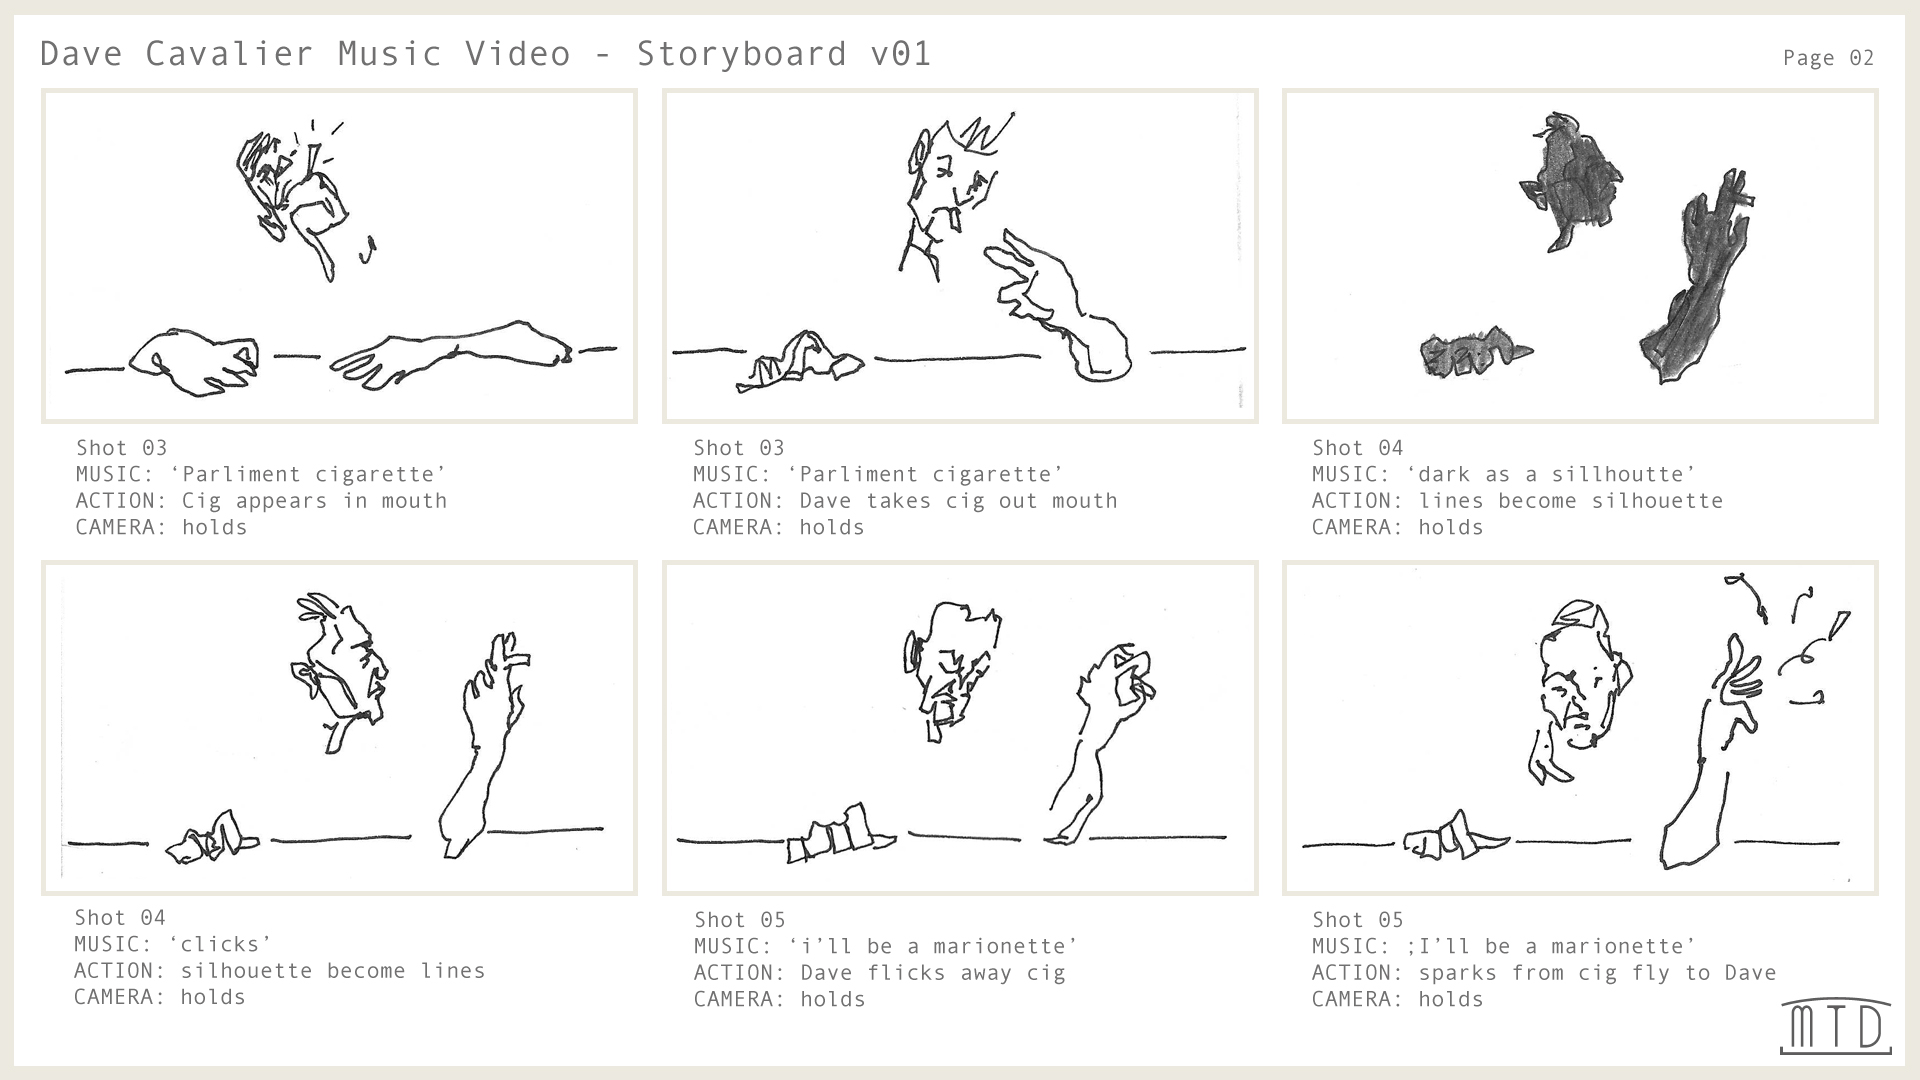 The Hold storyboard page 2